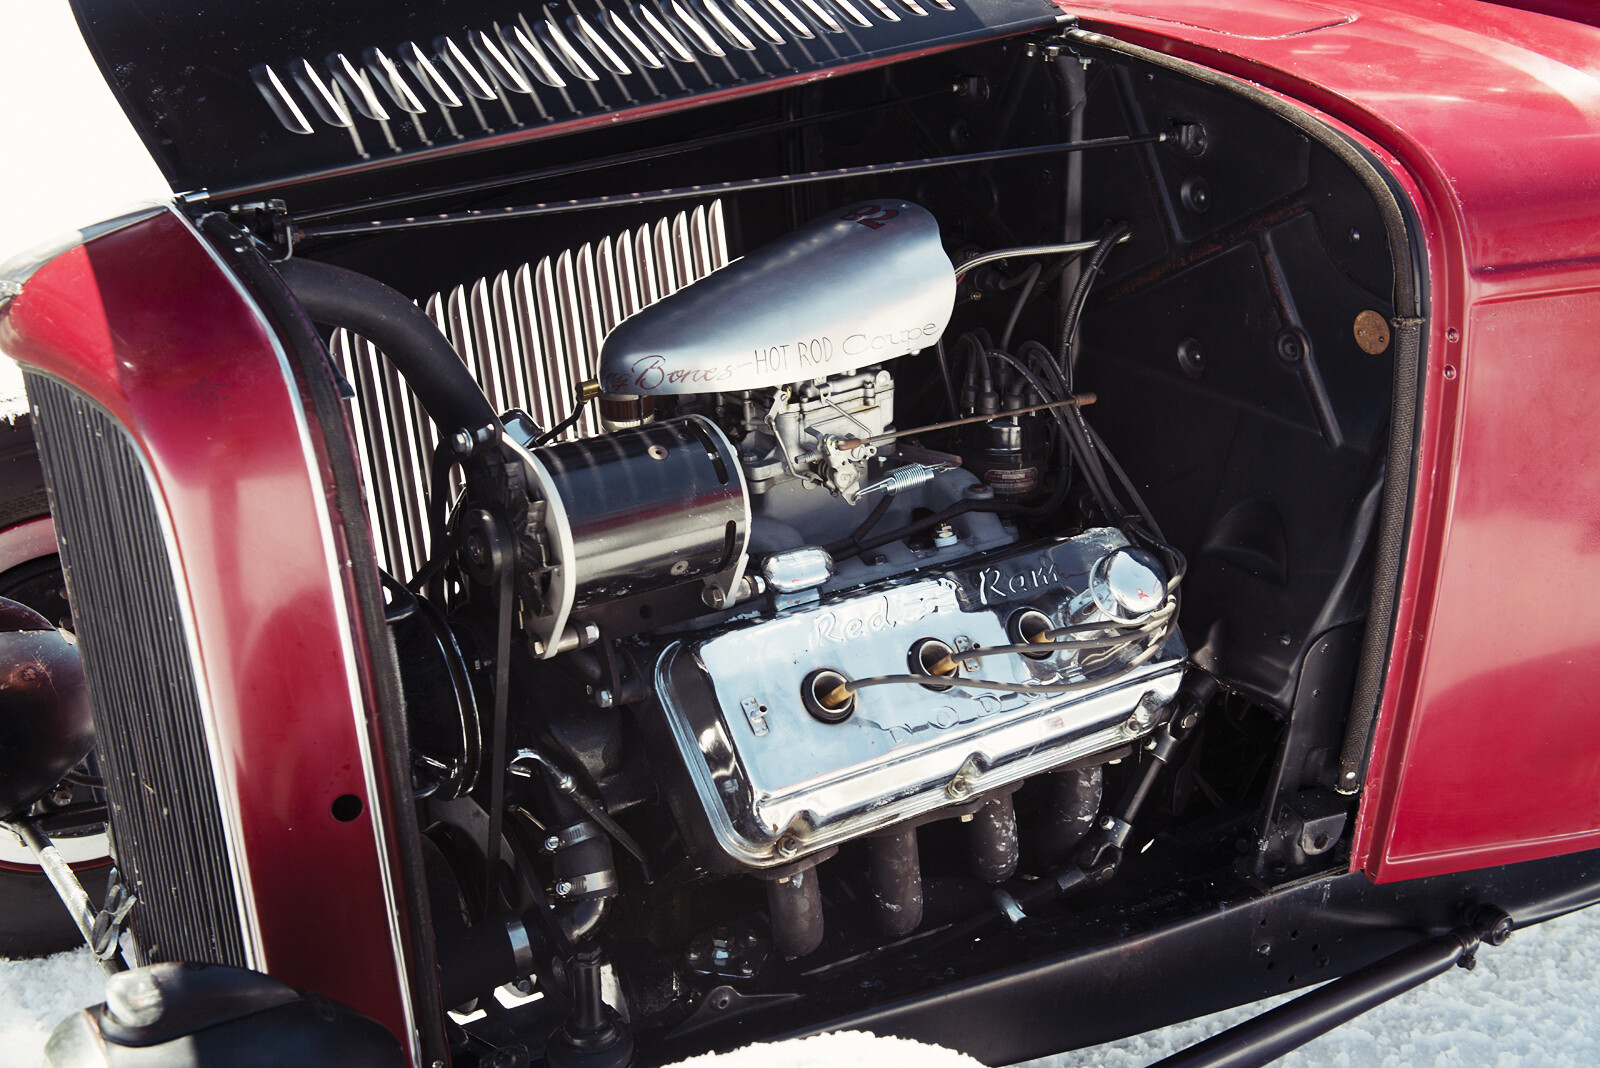 Street Machine Features Tom Mc Intyre Ford V 8 3 Window Engine